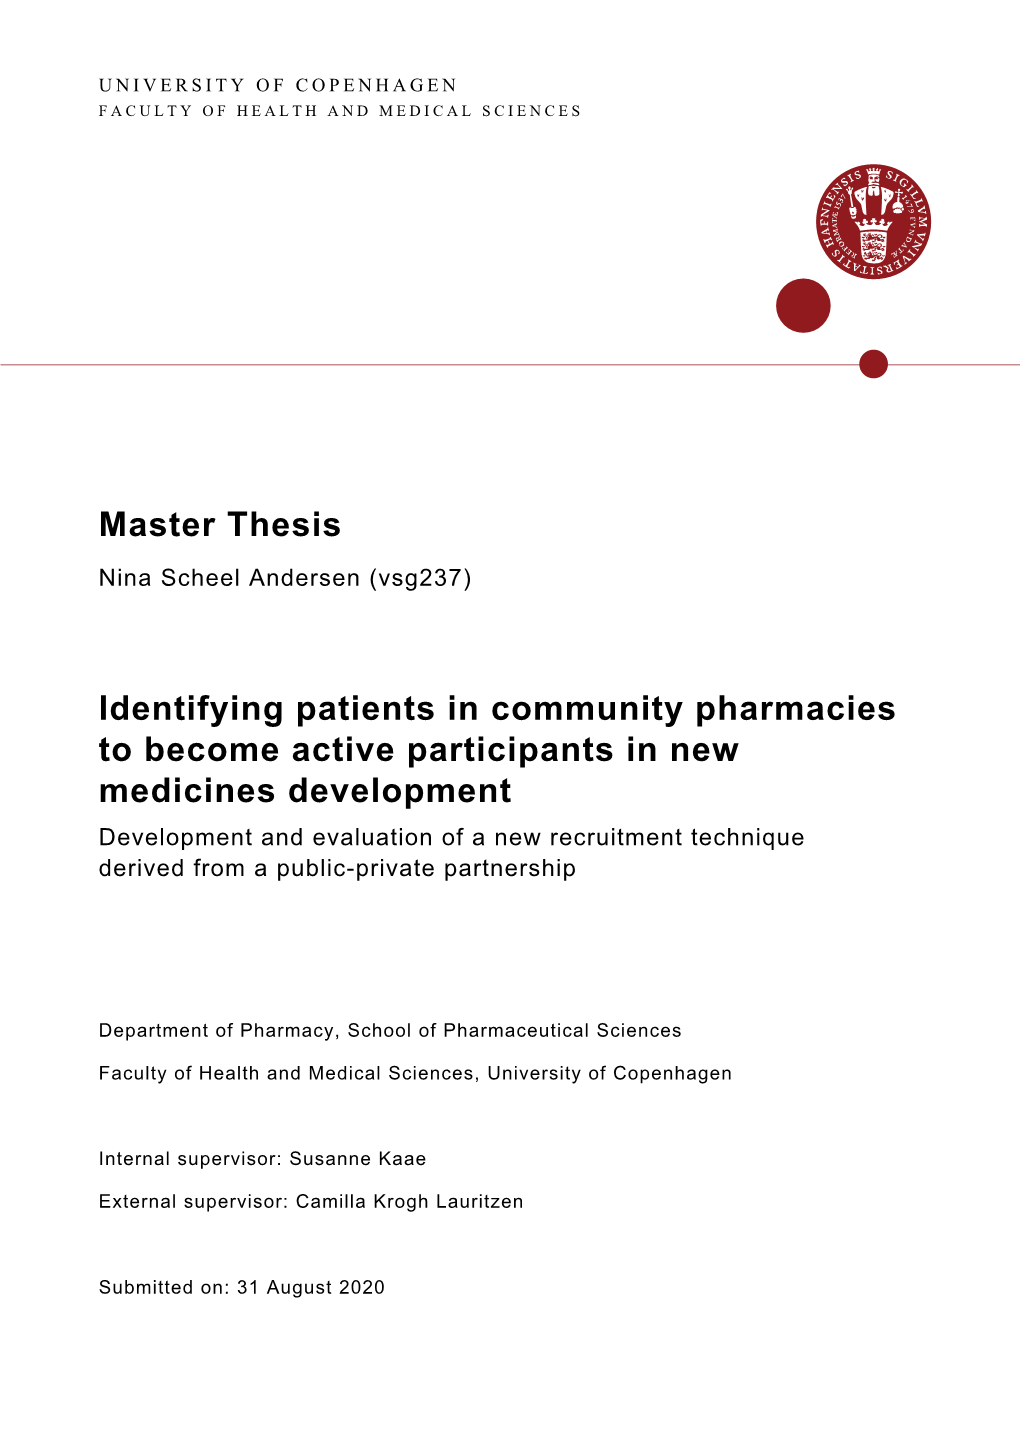 Master Thesis Identifying Patients in Community Pharmacies to Become